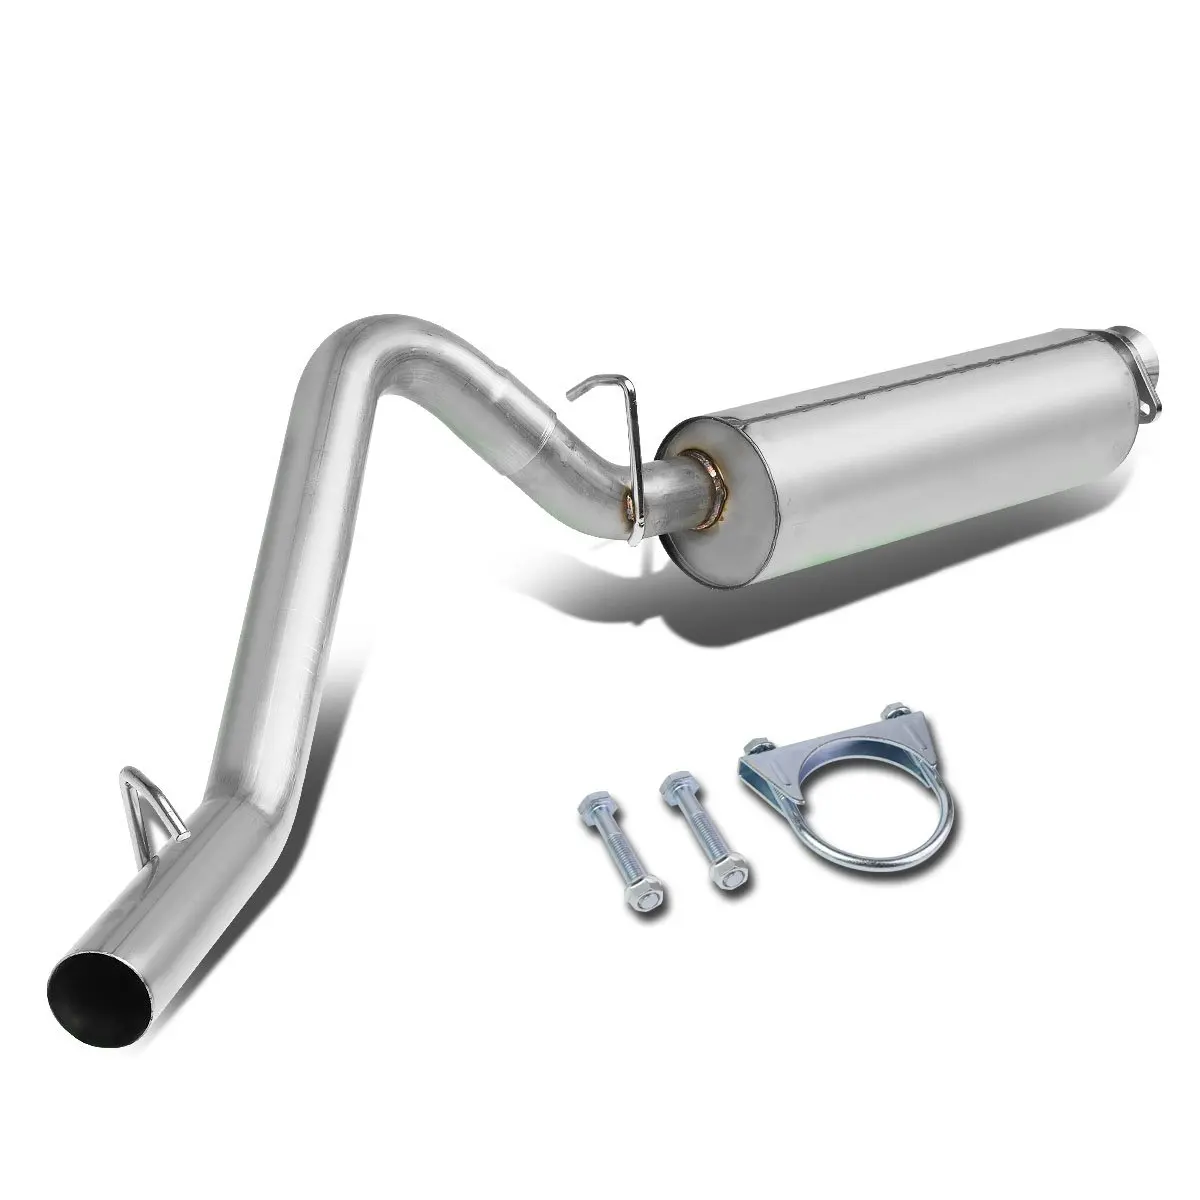 Stainless Steel Round  Inches Muffler Catback Exhaust System Tj For Jeep  Wrangler   - Buy Cat Back Exhaust System For Jeep,Exhaust  Extraction System,Racing Exhaust System Product on 